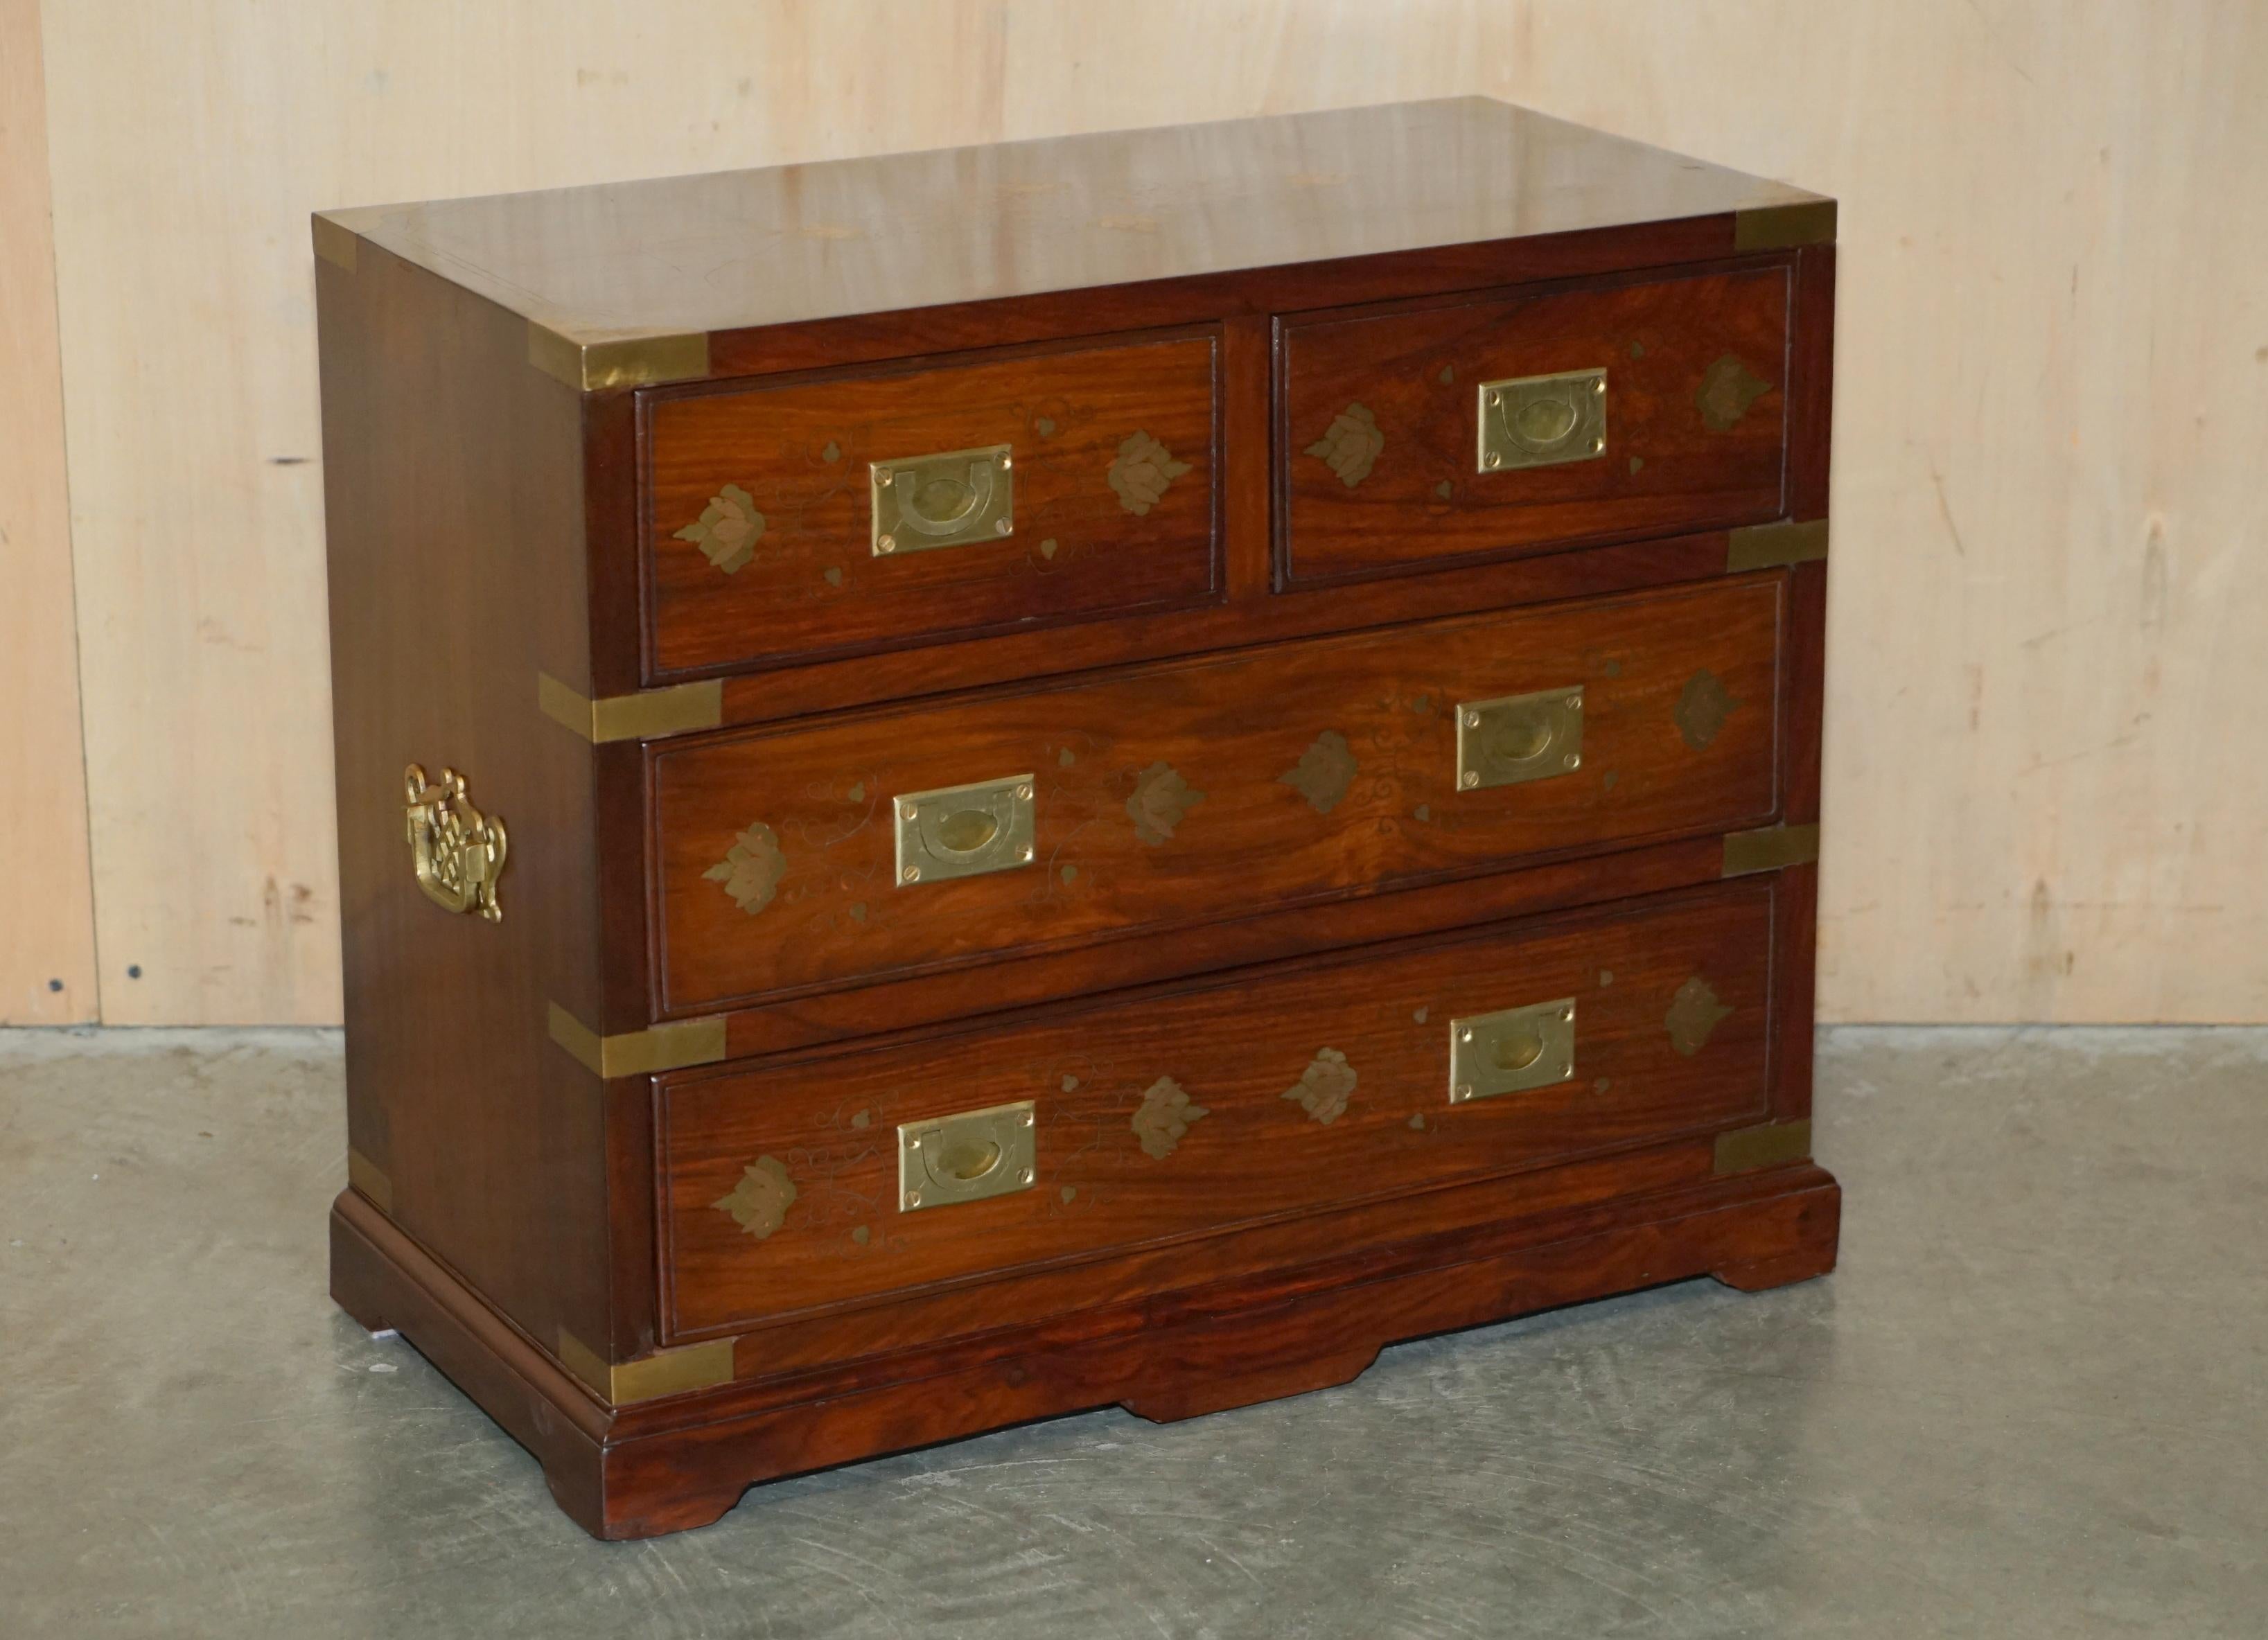 Royal House Antiques

Royal House Antiques is delighted to offer for sale this stunning Export circa 1920's Rosewood & Brass small chest of drawers 

Please note the delivery fee listed is just a guide, it covers within the M25 only for the UK and